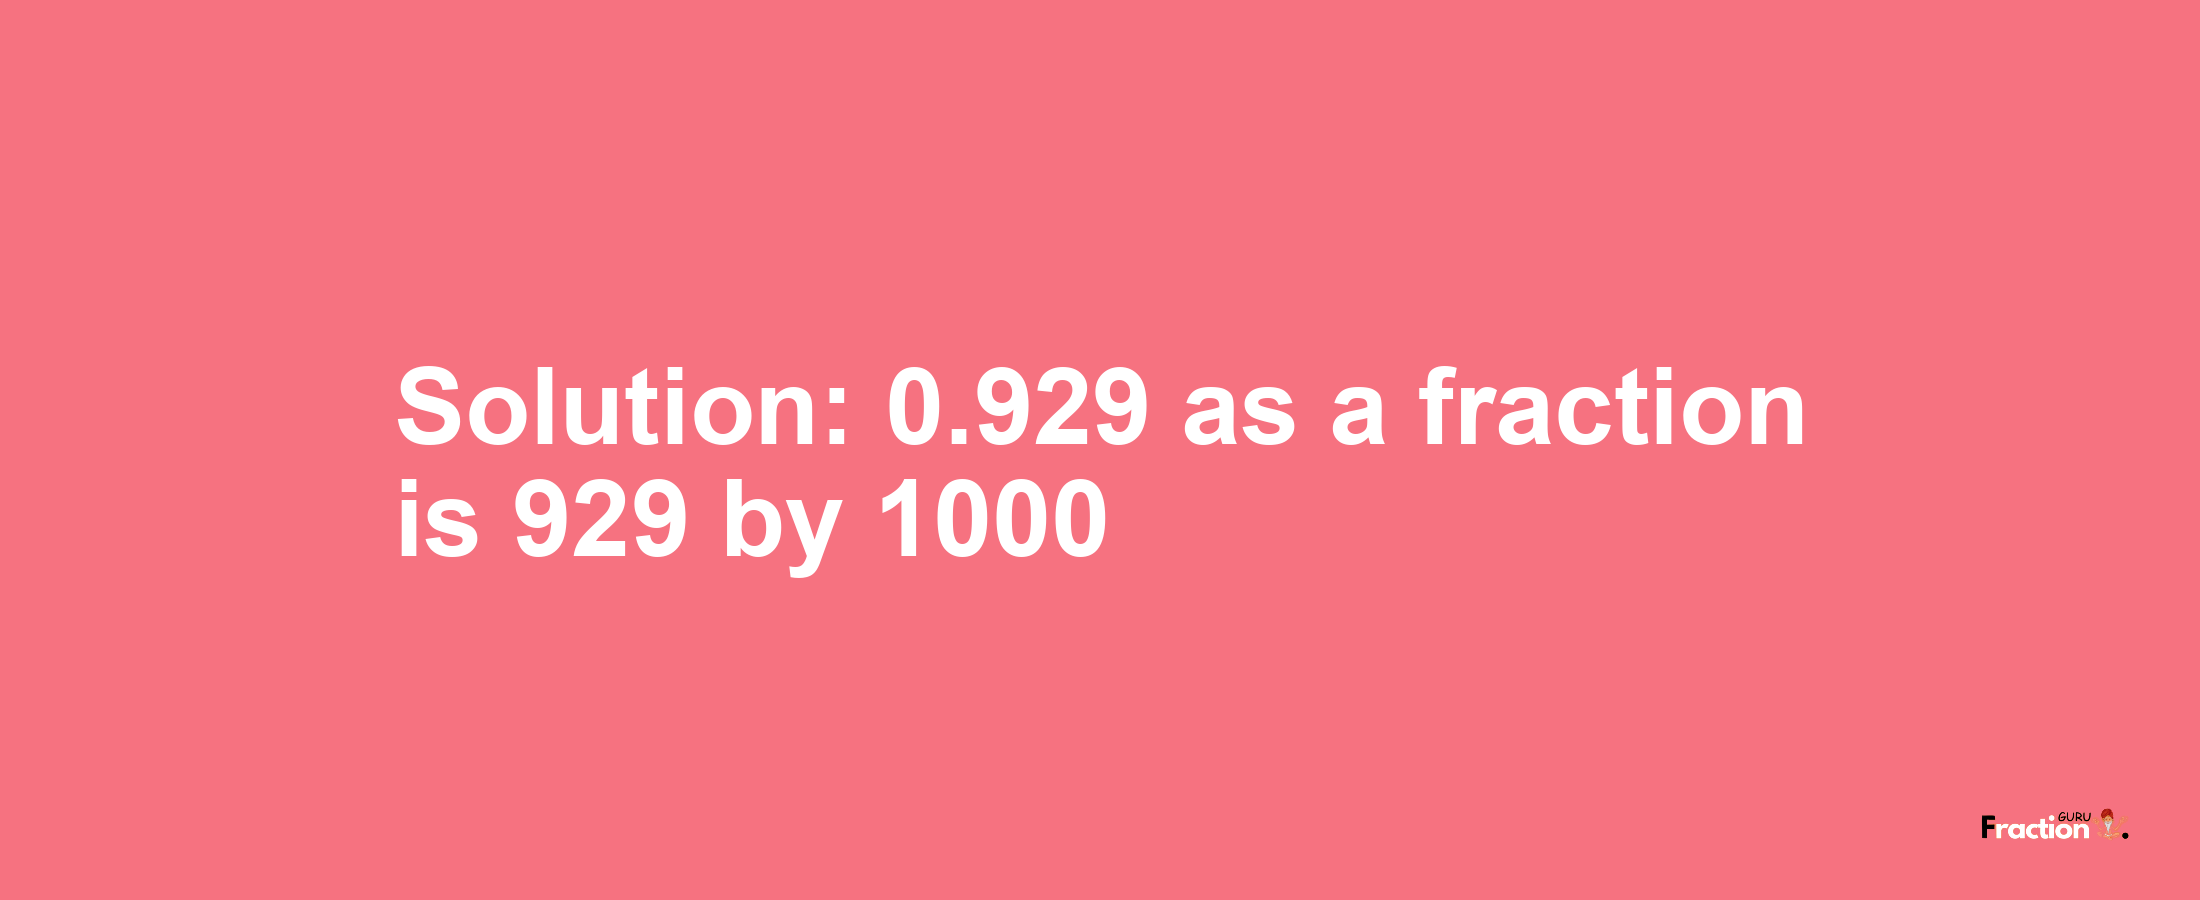 Solution:0.929 as a fraction is 929/1000